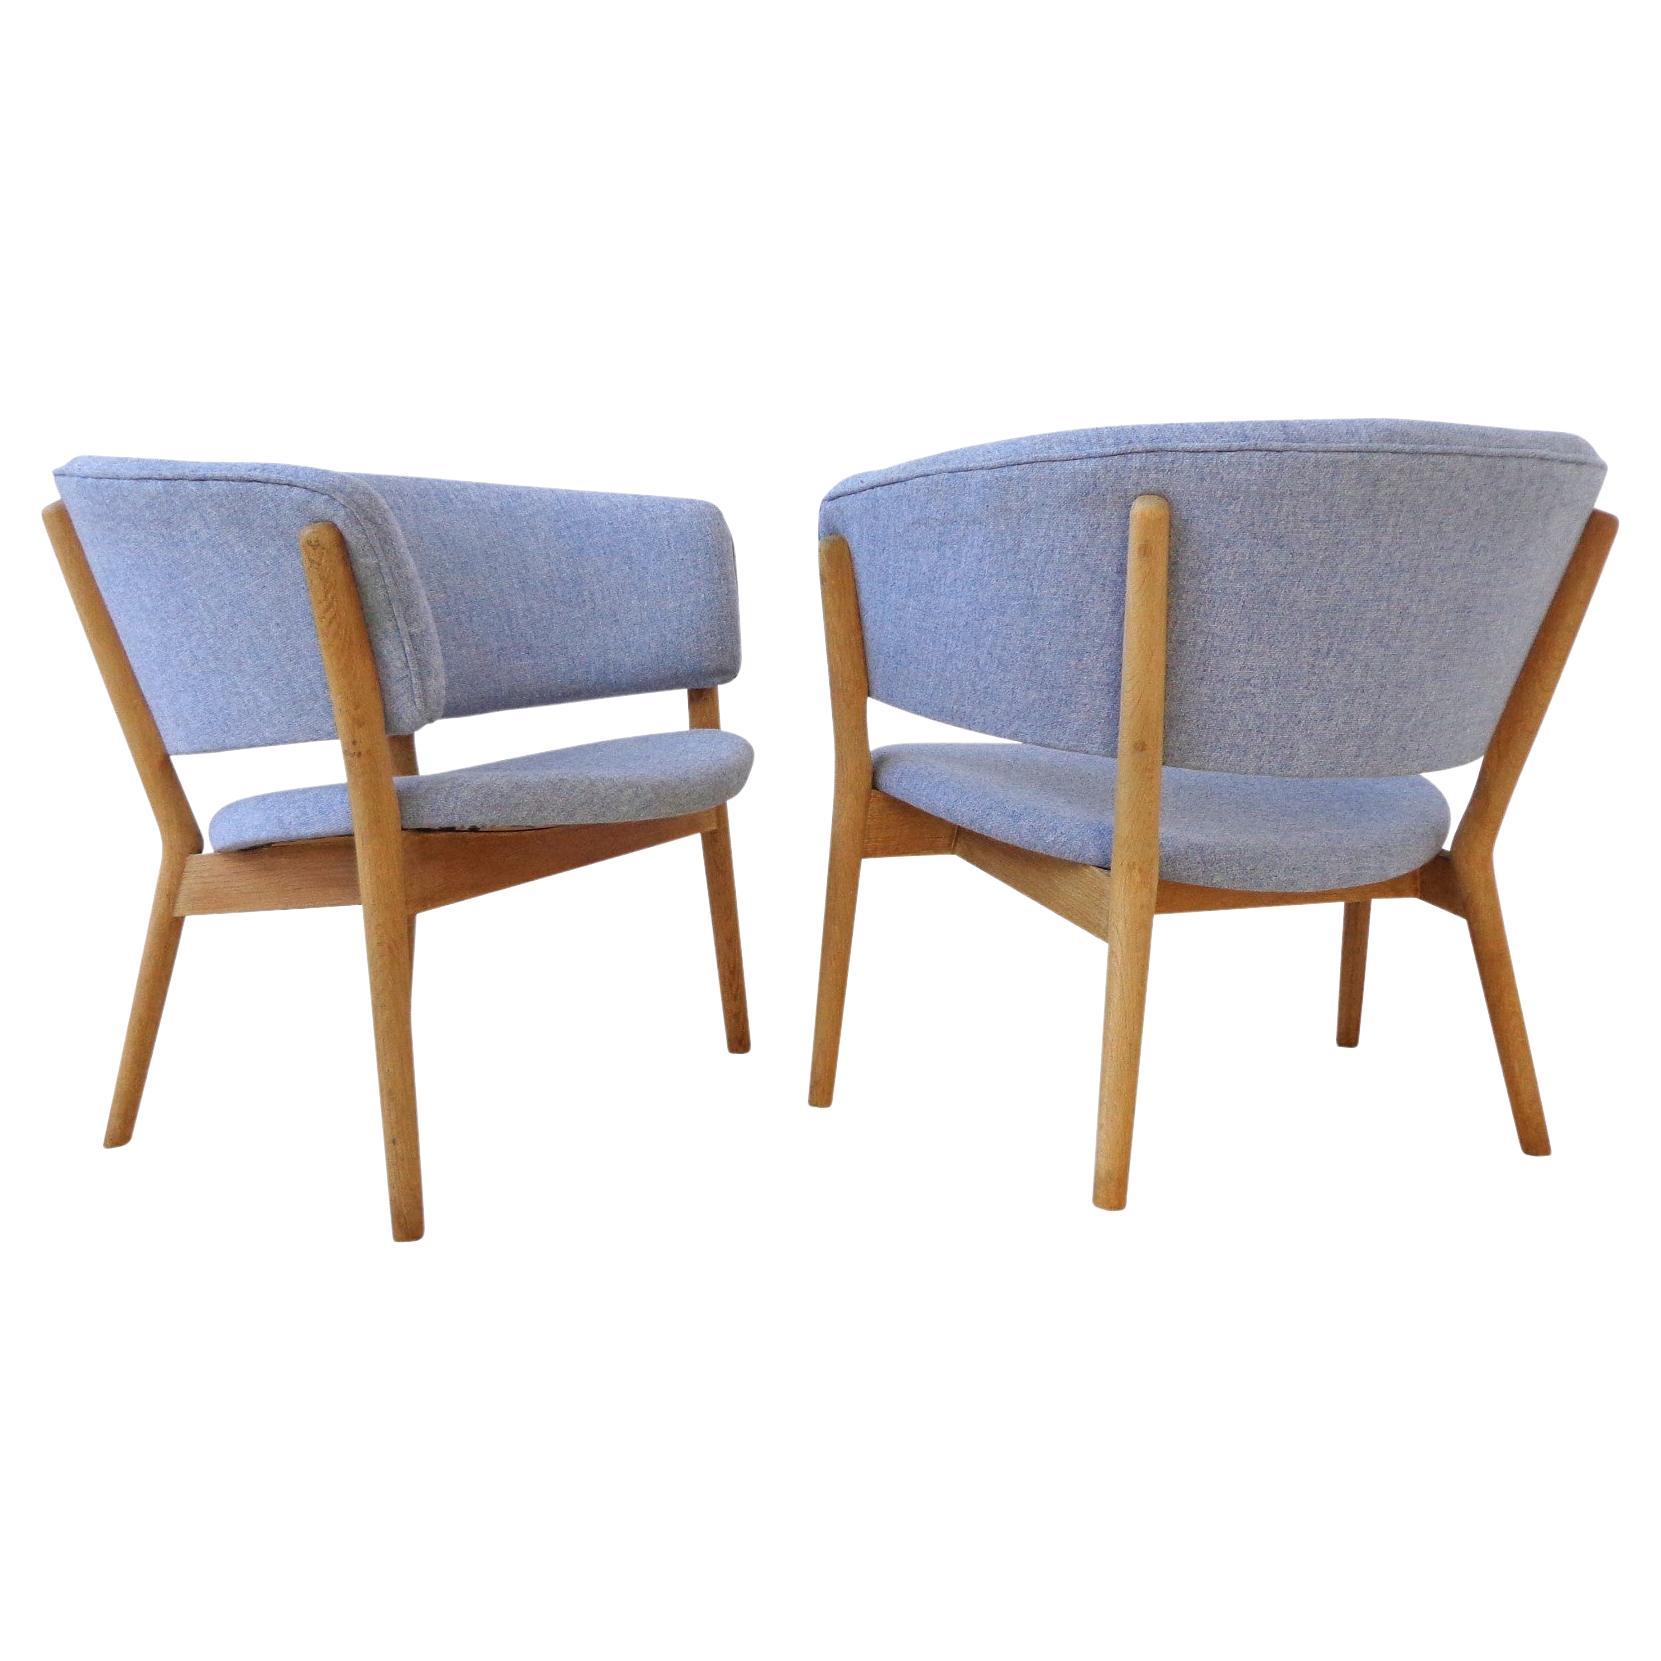 Pair of Iconic Basket Chairs by Nanna Ditzel, Denmark, 1950s at 1stDibs ...